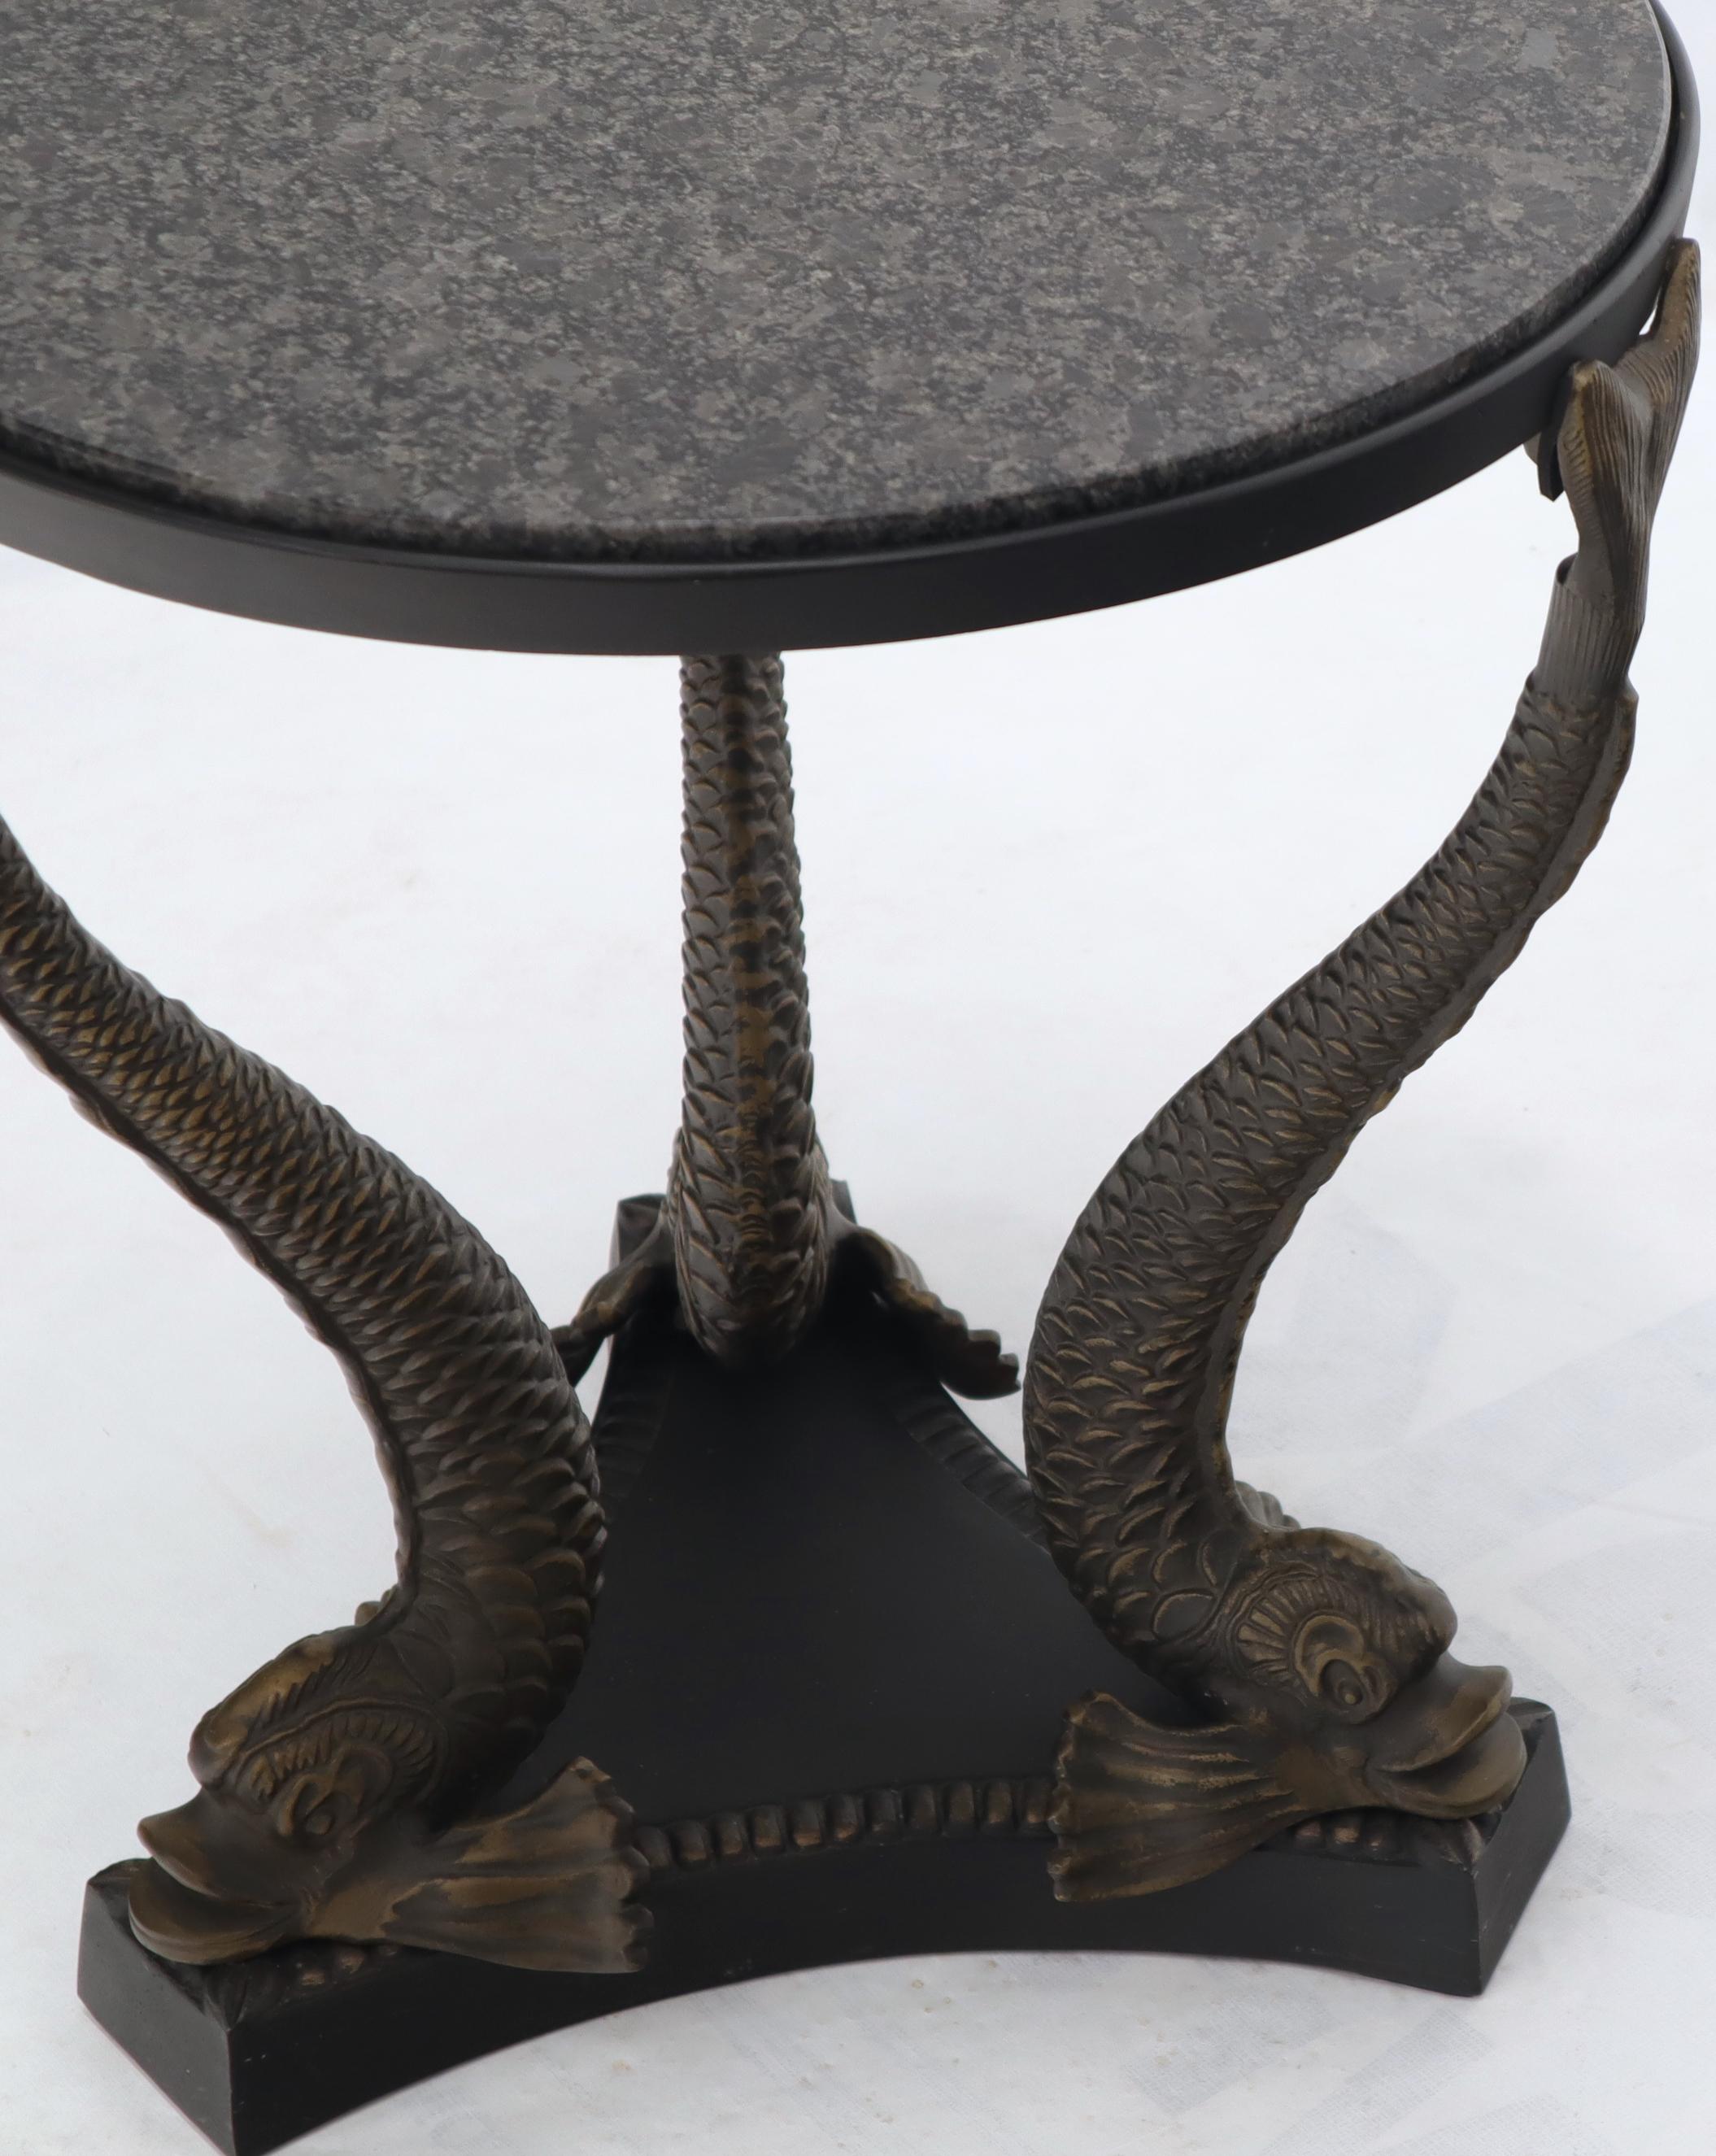 20th Century Bronze Triple Dolphins Base Granite Top Round Side End Table Pedestal For Sale